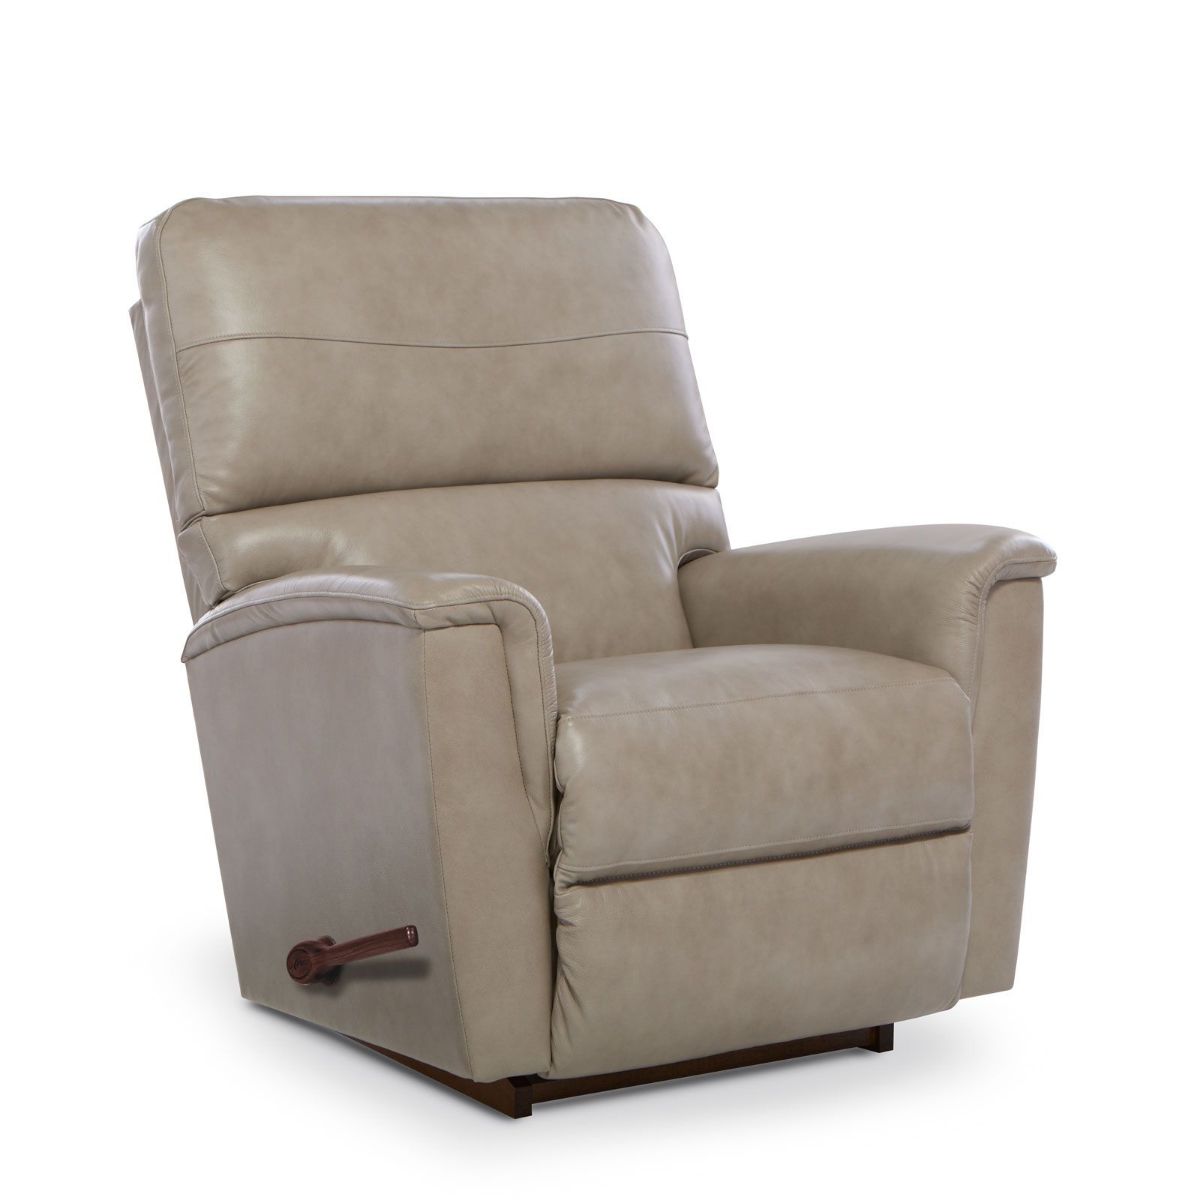 Picture of Ava Putty Leather Rocker Recliner